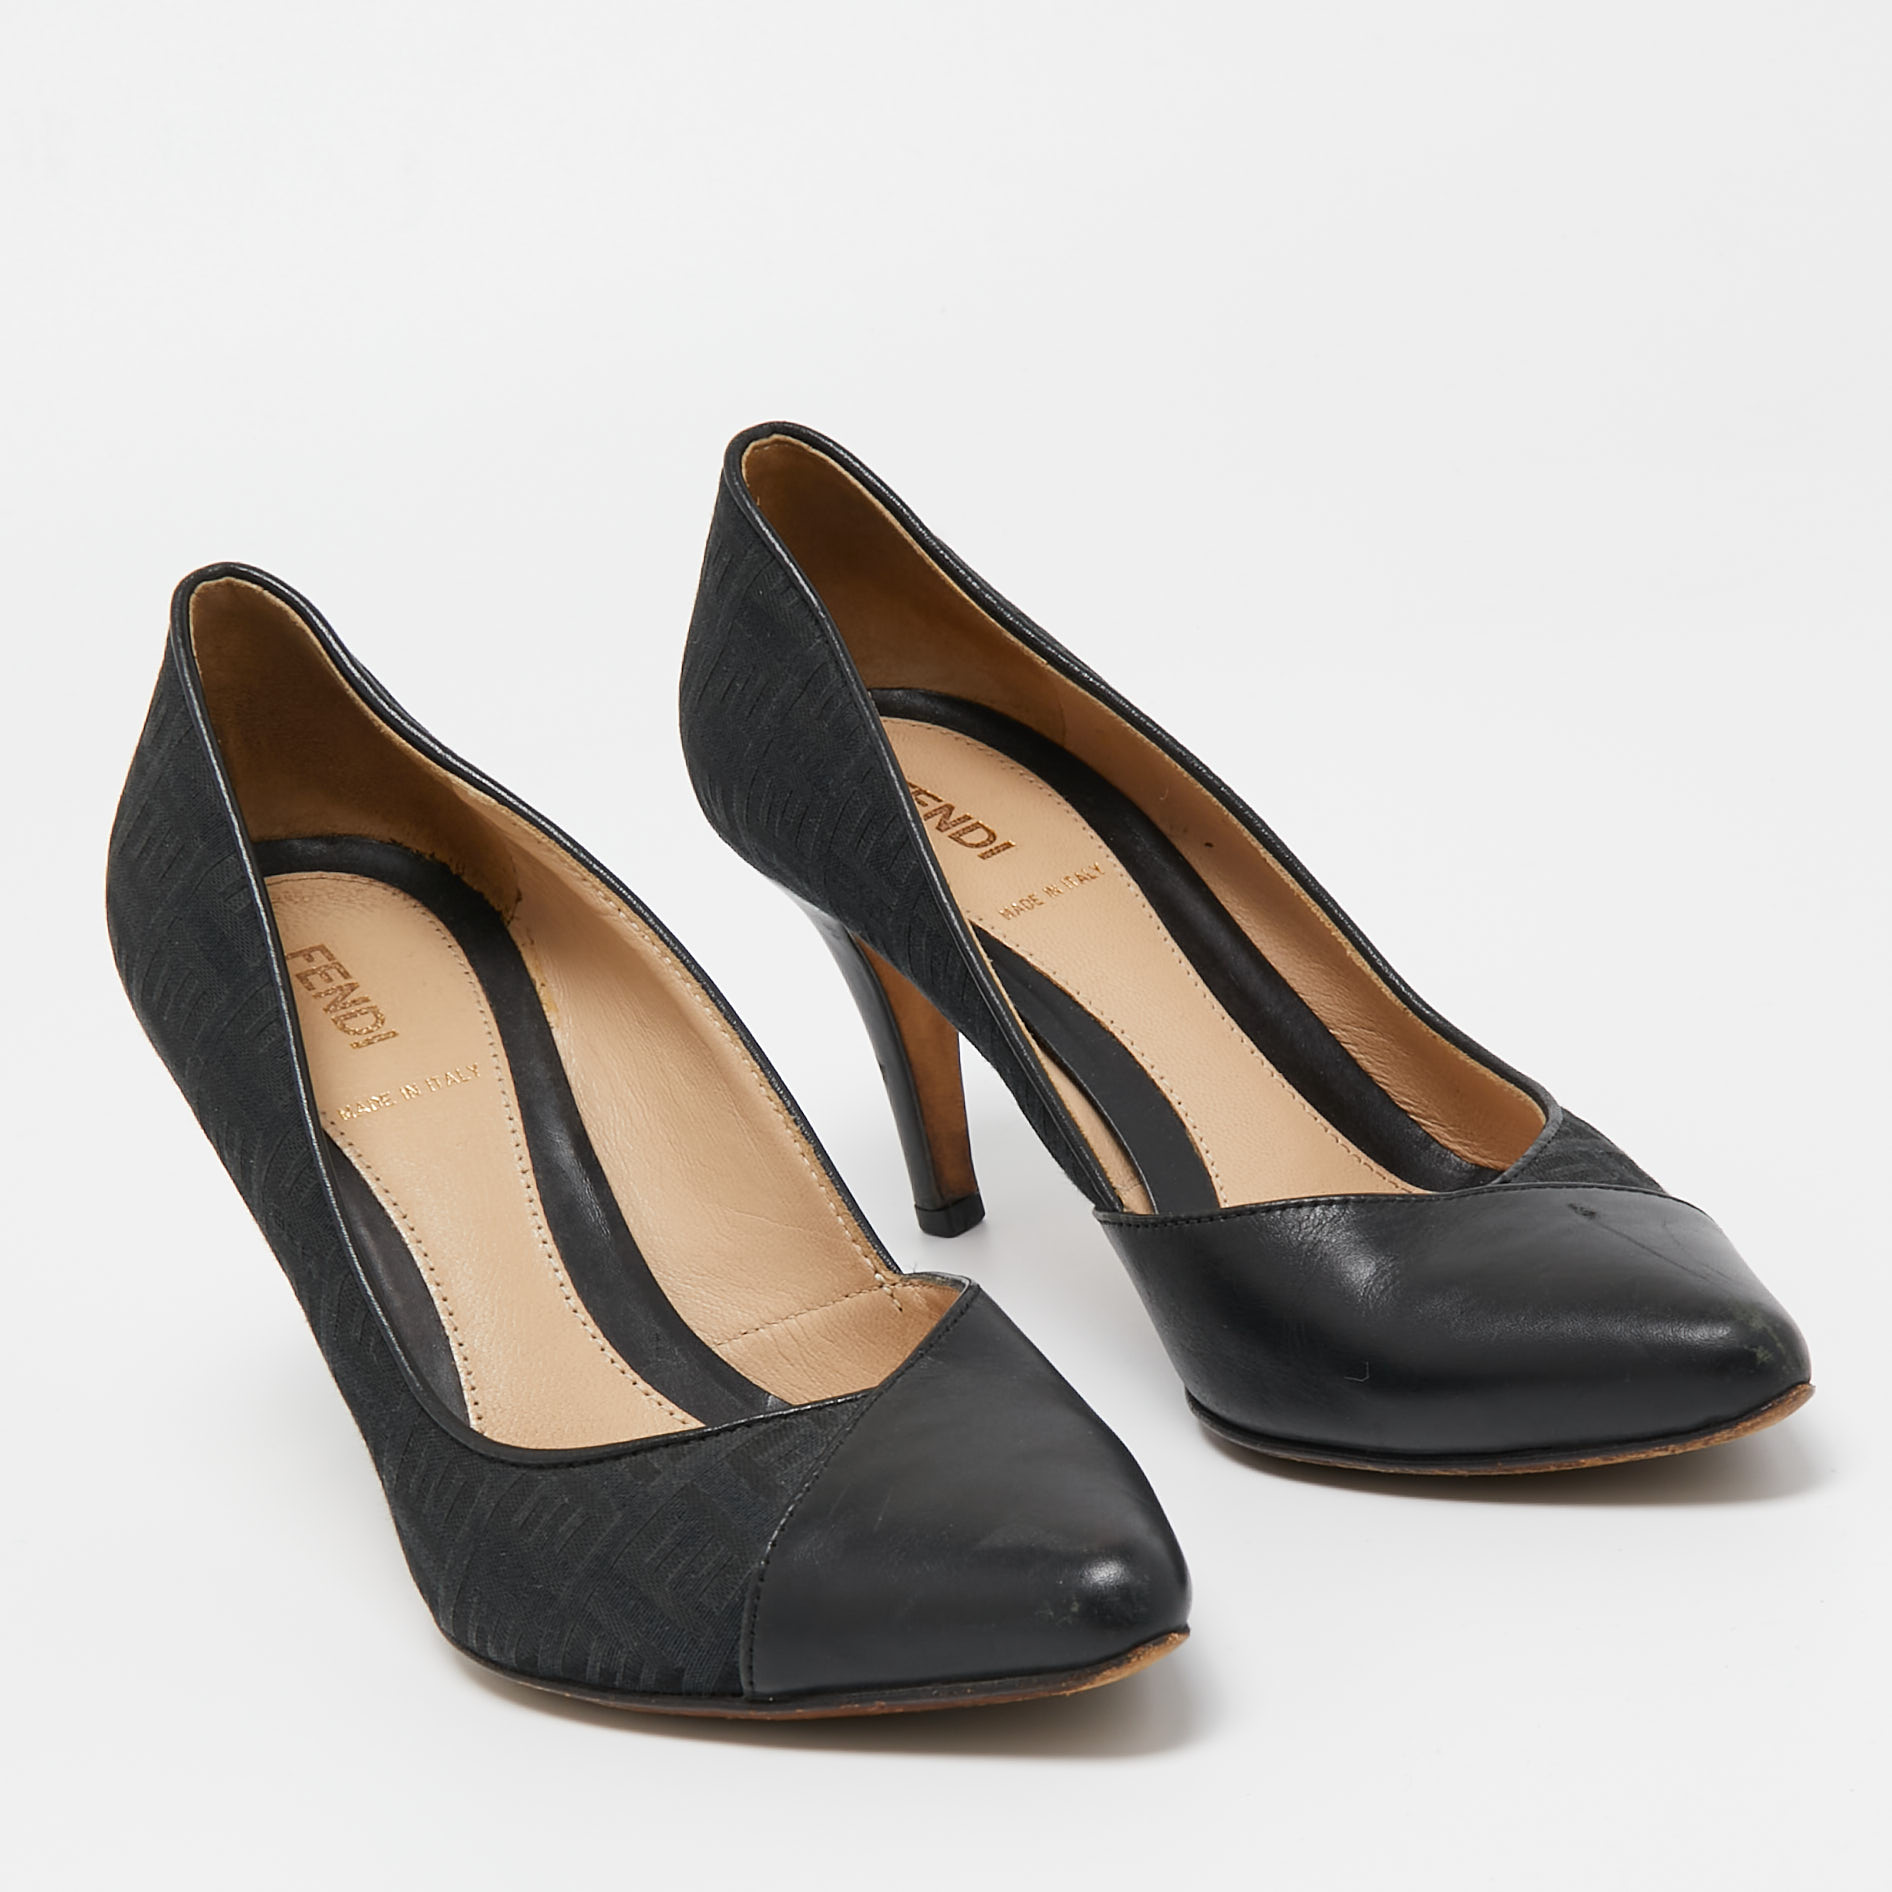 Fendi Black Leather And Zucca Canvas Pointed Toe Pumps Size 37